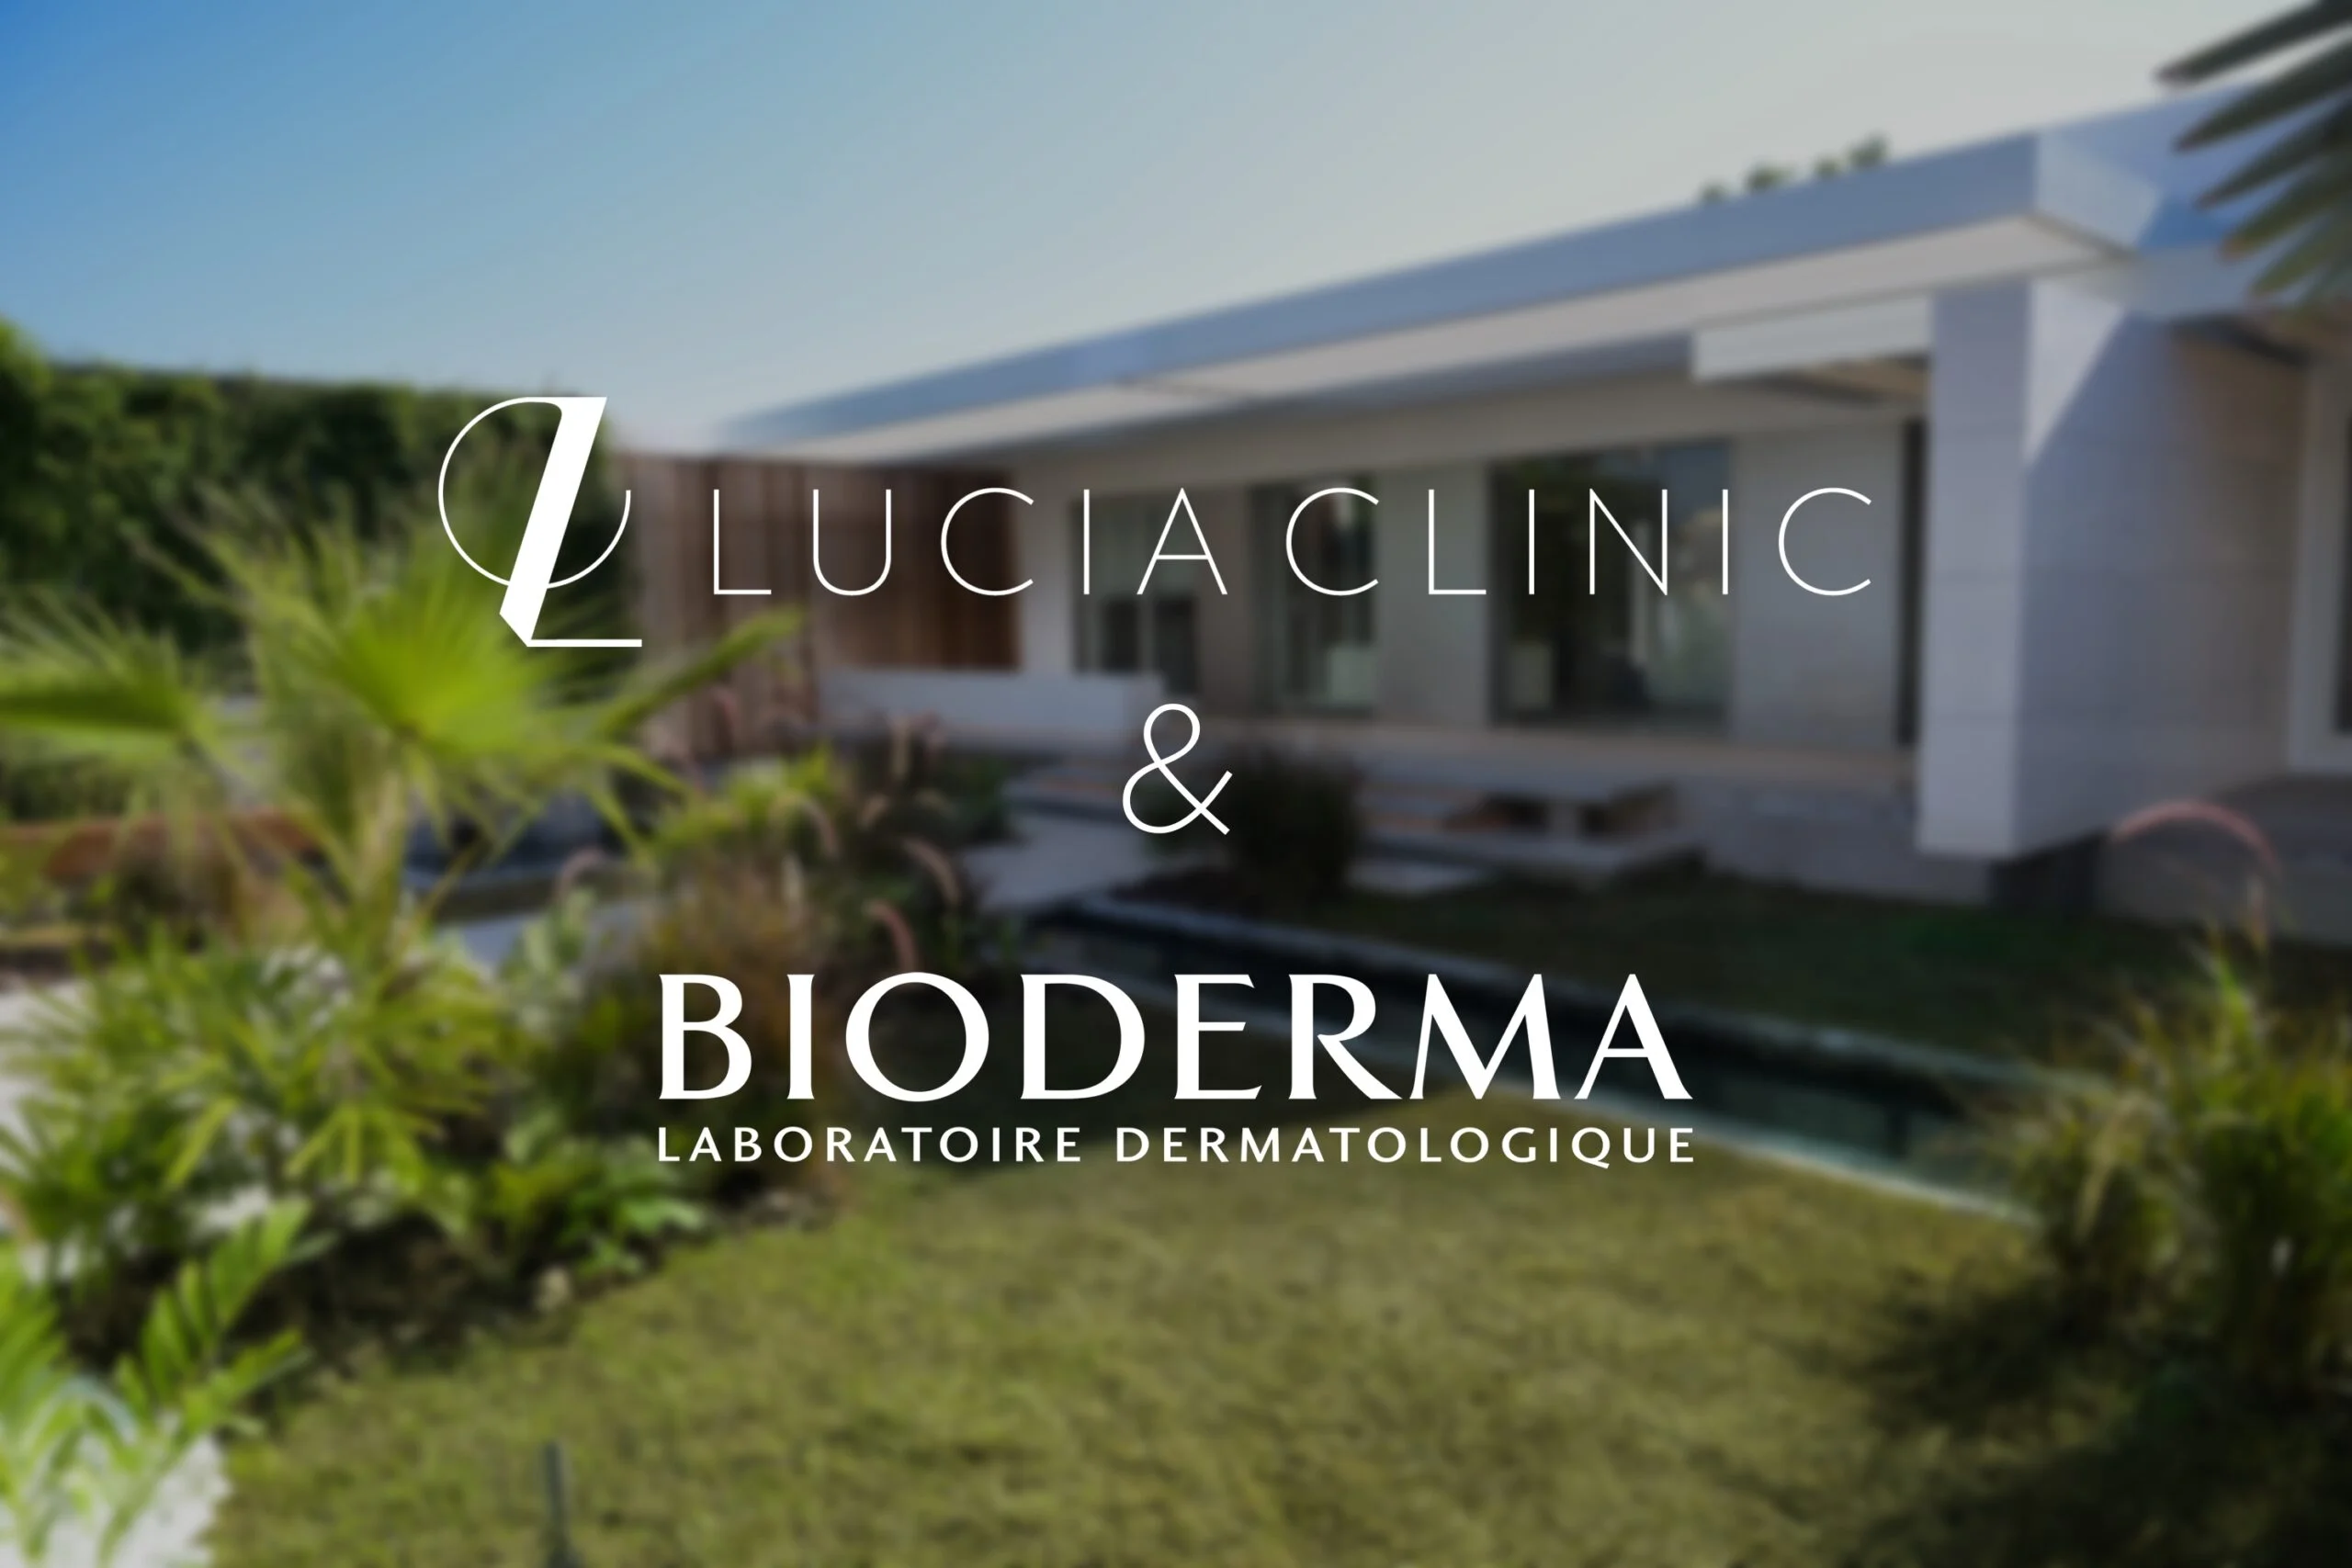 Dr. Radmila Lukian attends special Bioderma Skin Academy - the founder of Lucia Clinic participates at this unique event as a consultant dermatologist speaker.